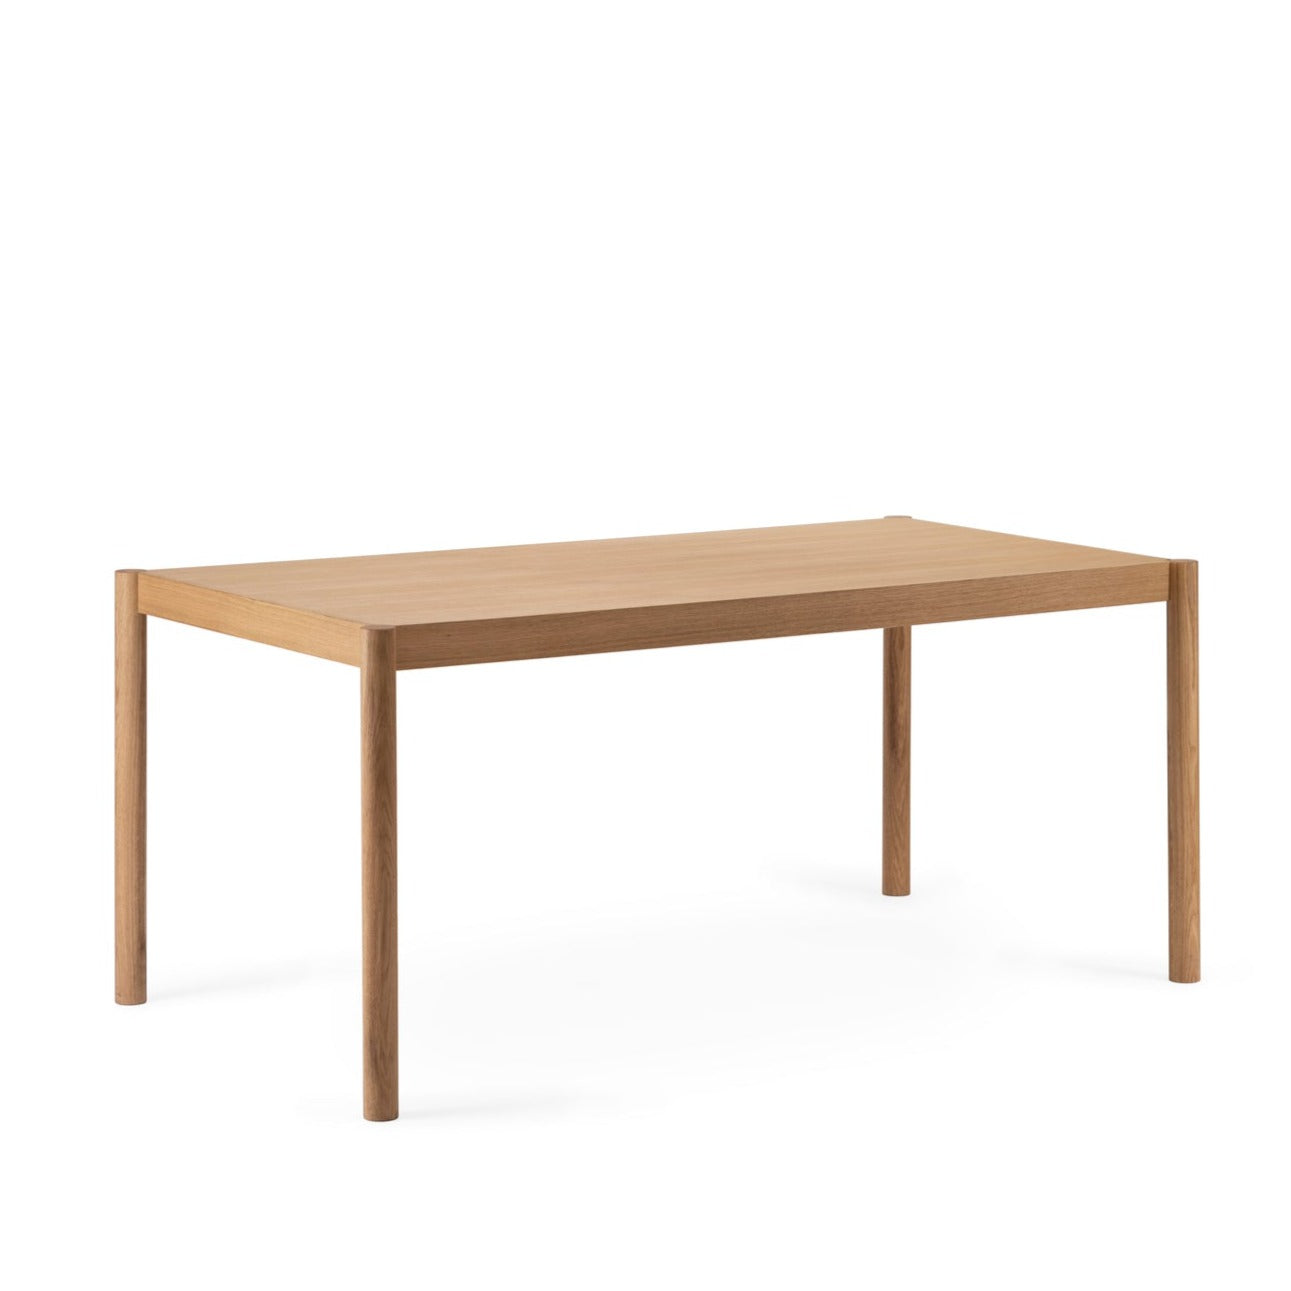 CITIZEN Dining Table-large-natural oak